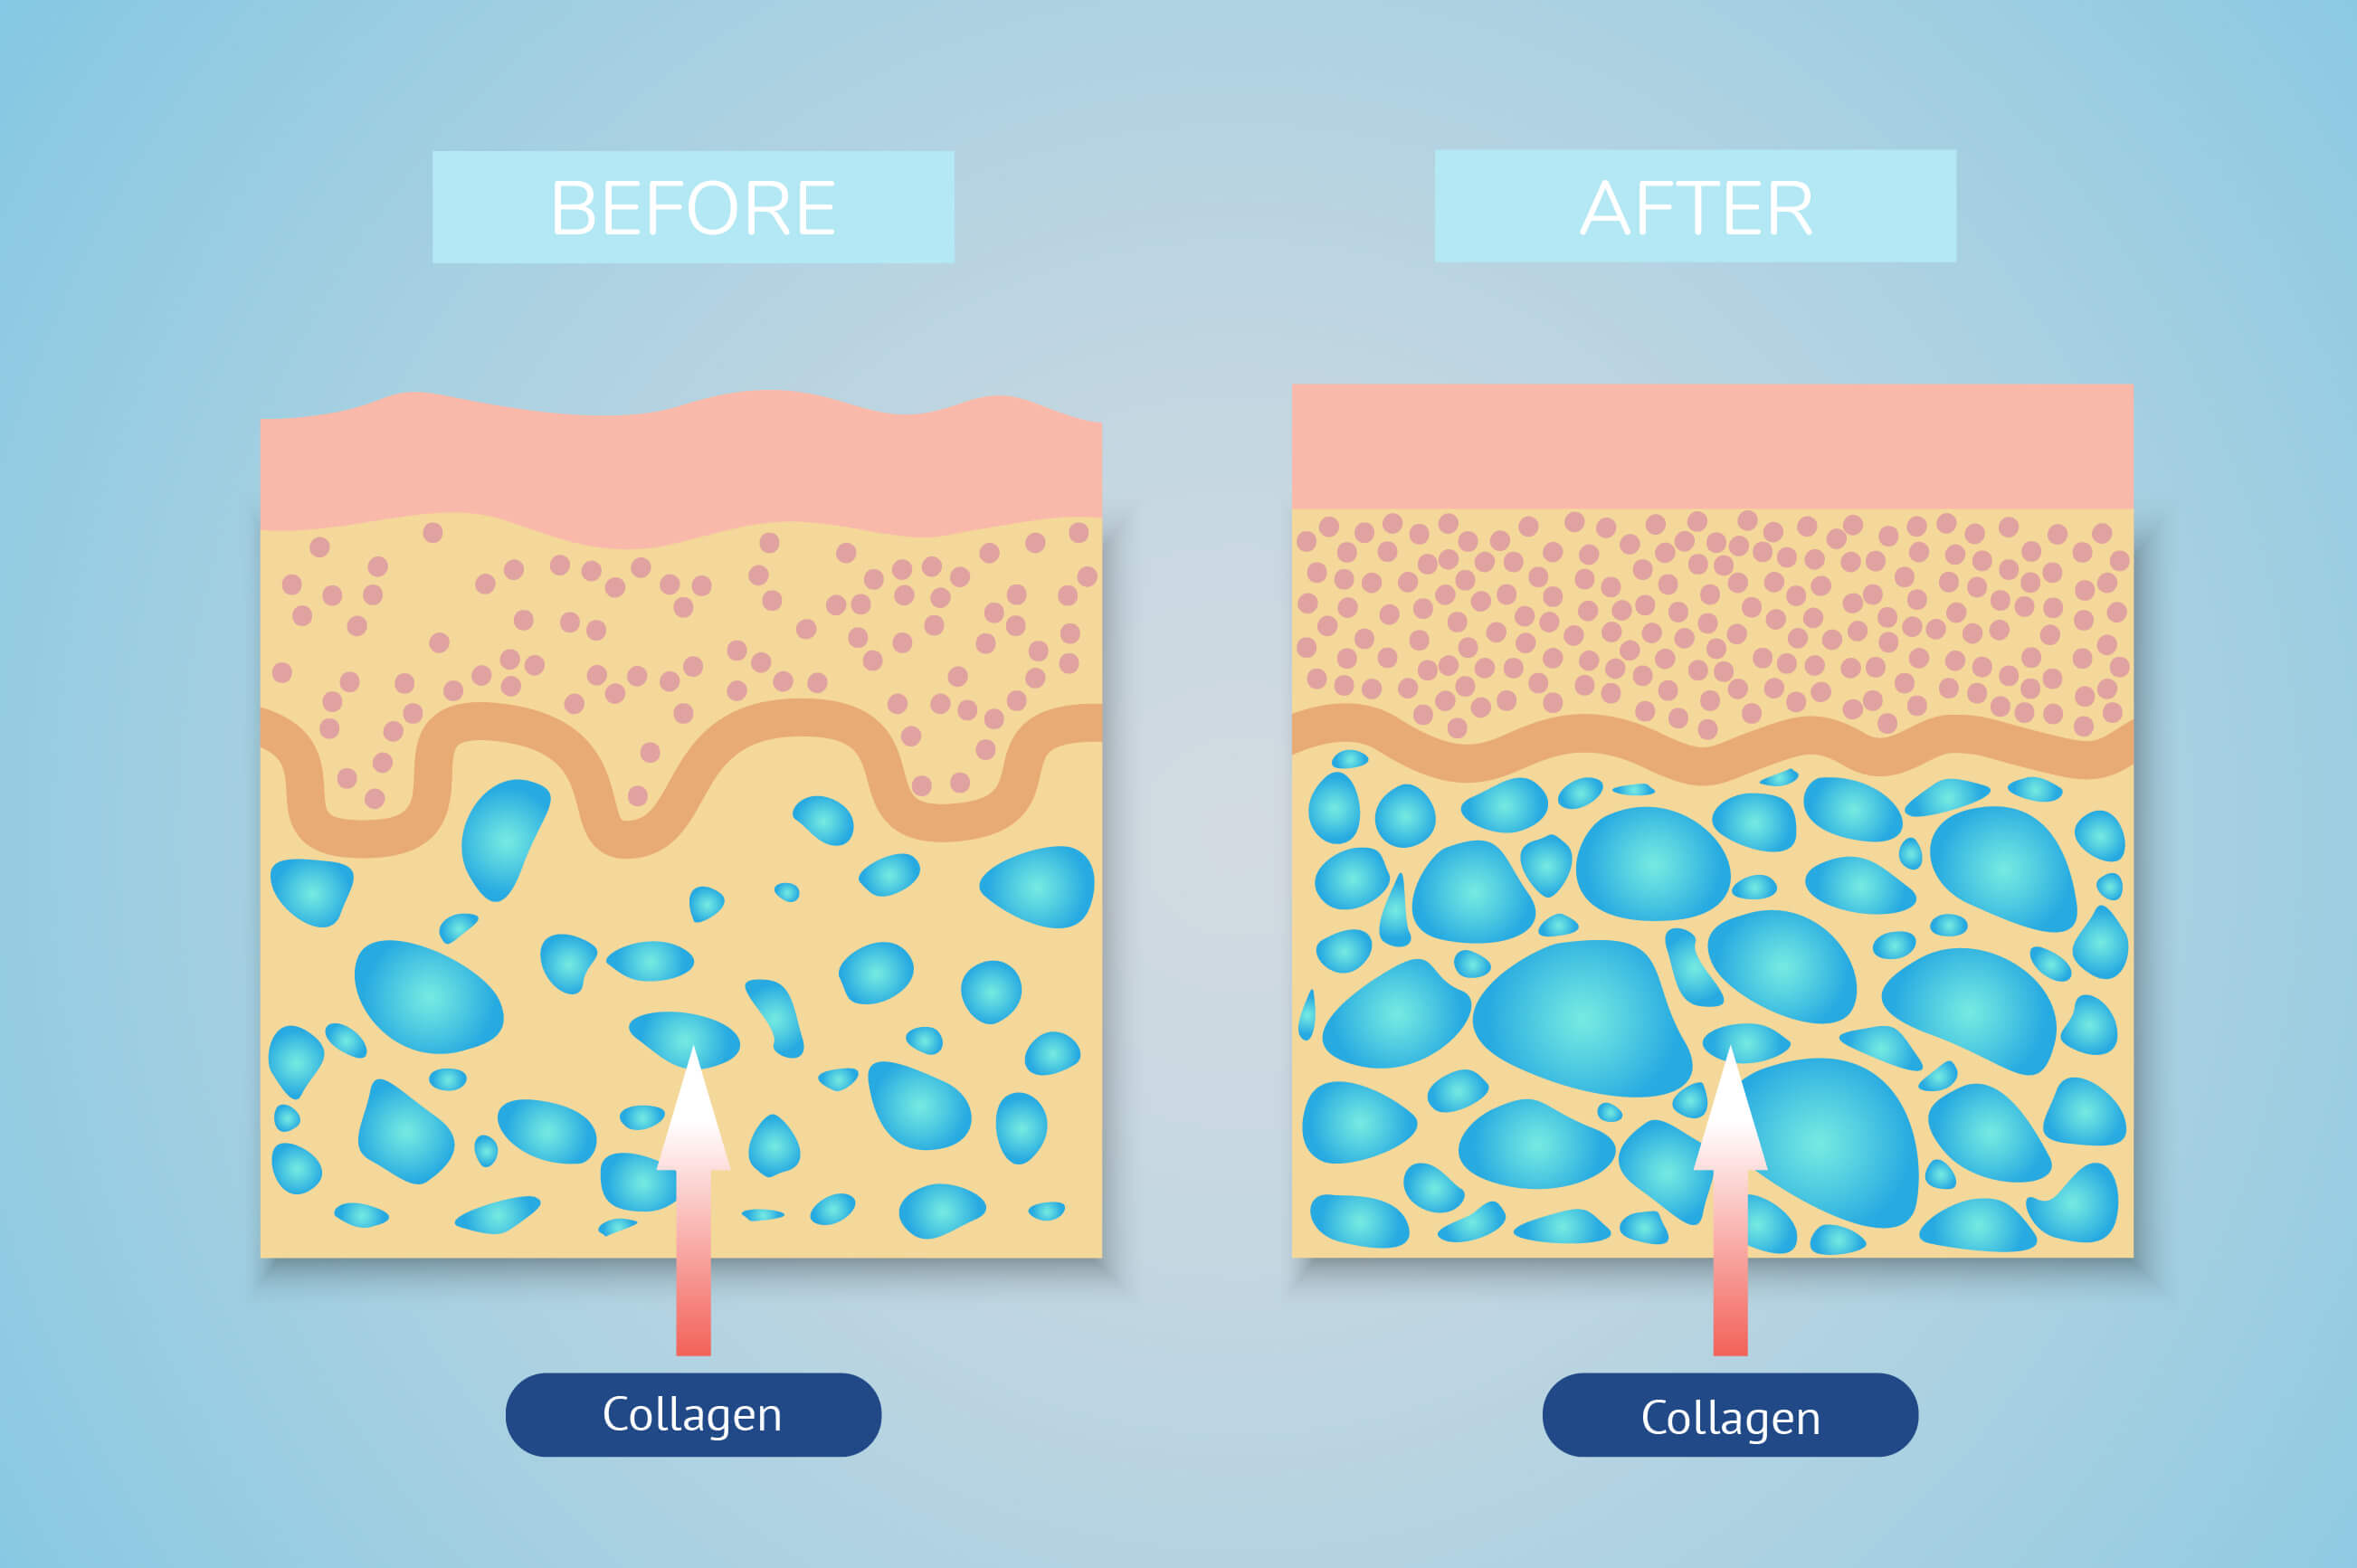 Illustration of the effect of collagen on skin before and after